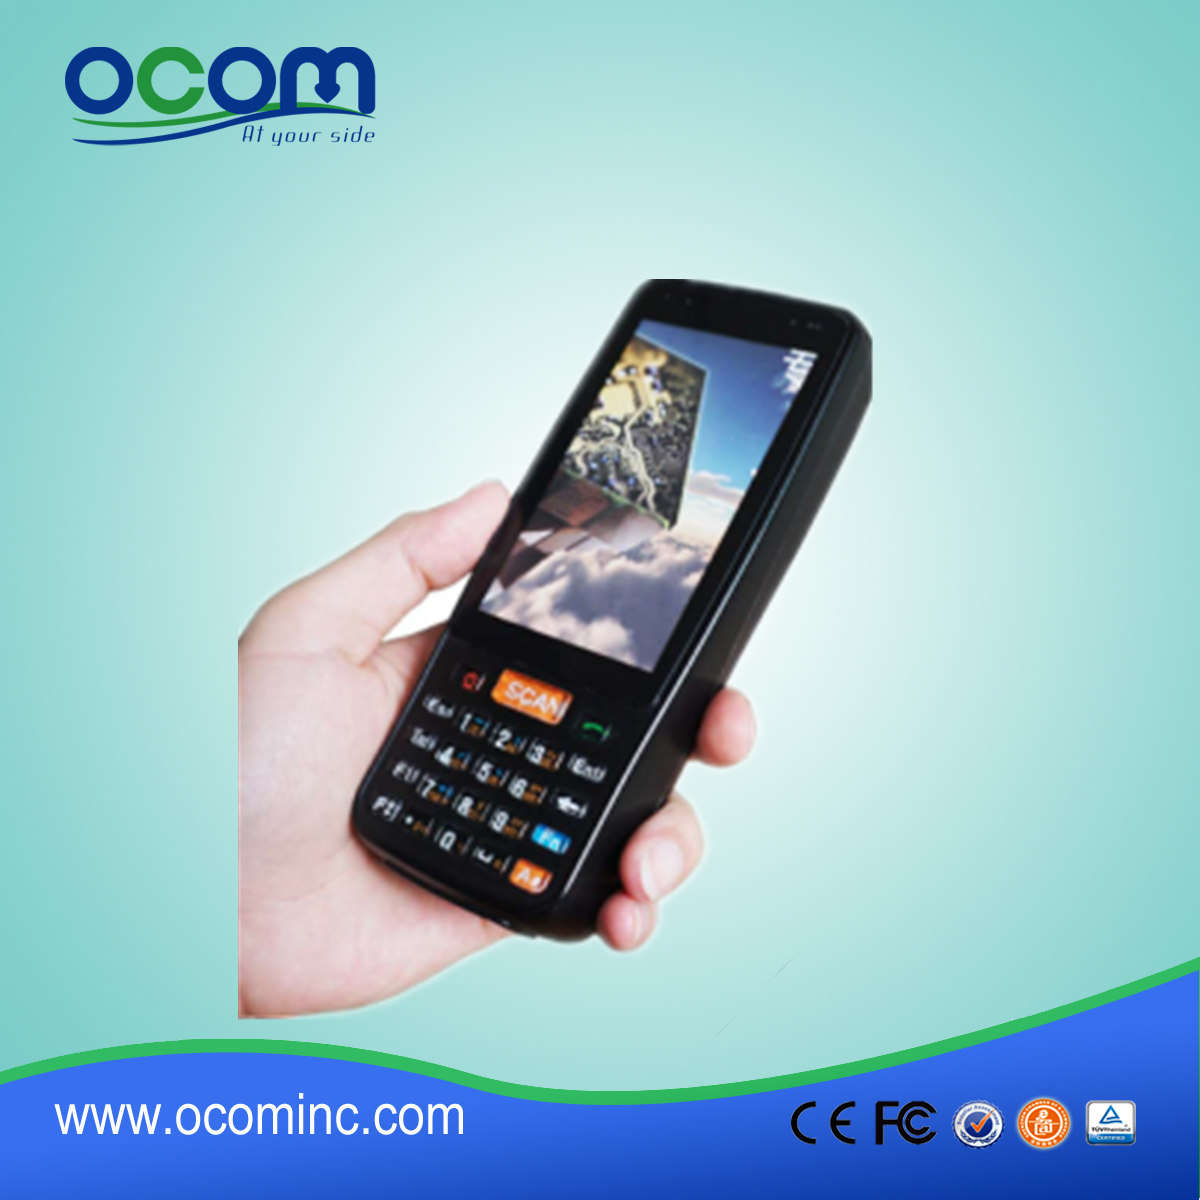 OCBS-D4000 Industrial Barcode Scanner PDA met Android OS